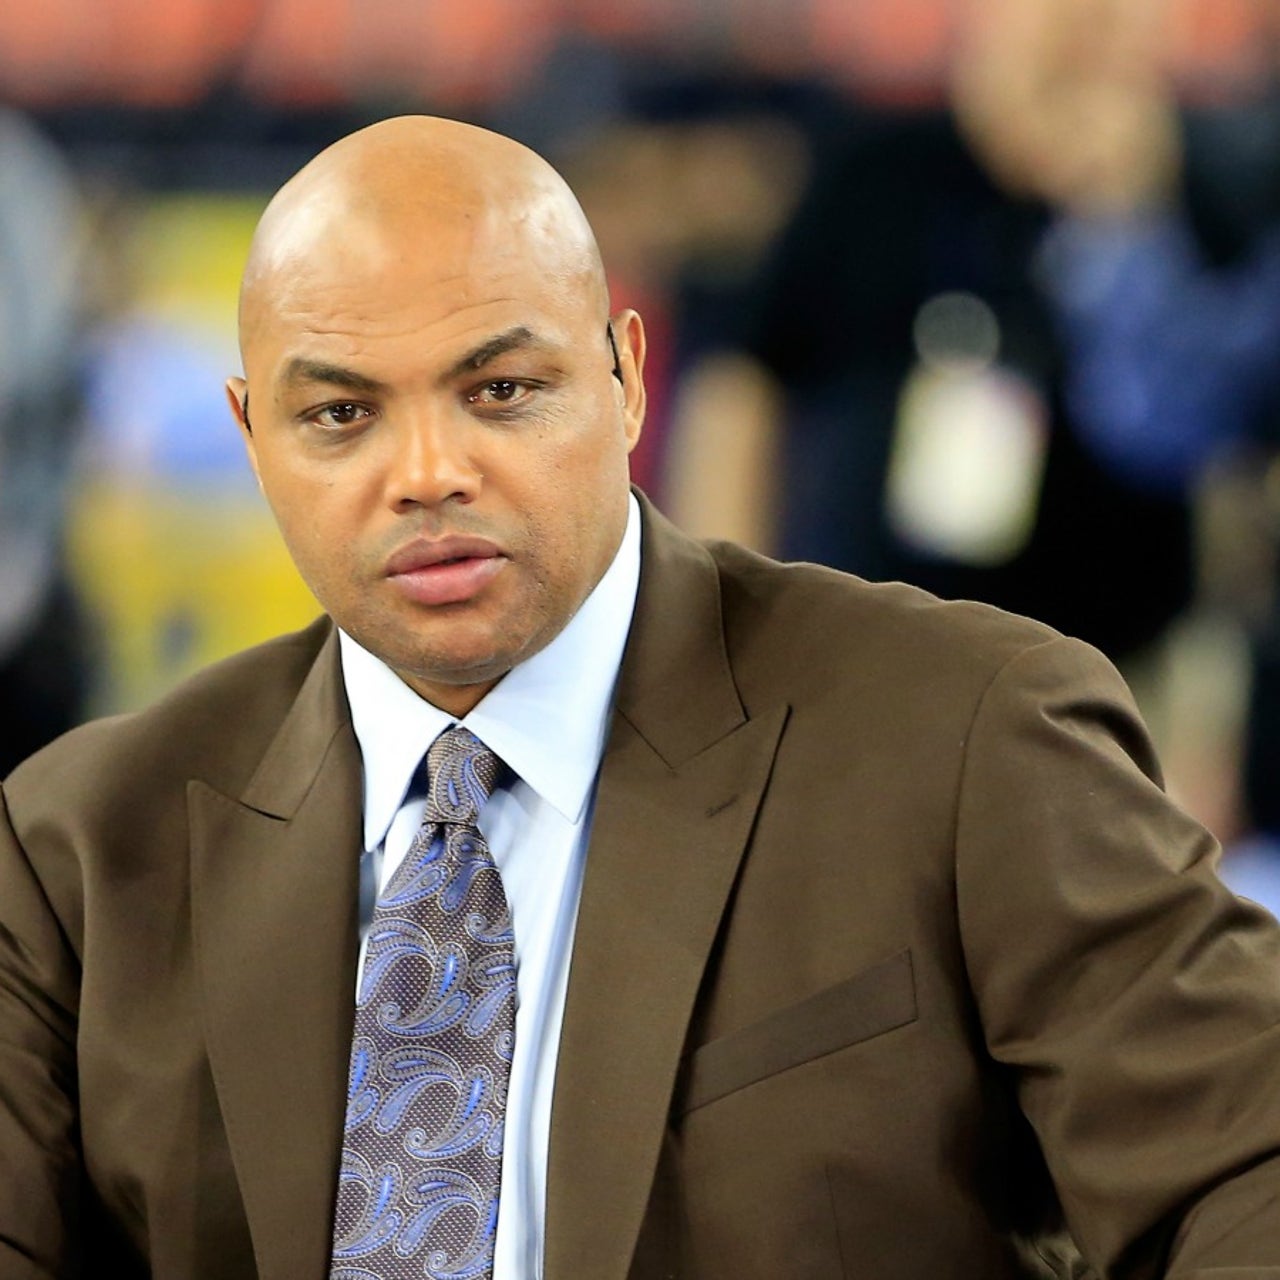 Charles Barkley has the best reaction to Russell Westbrook's pregame outfit